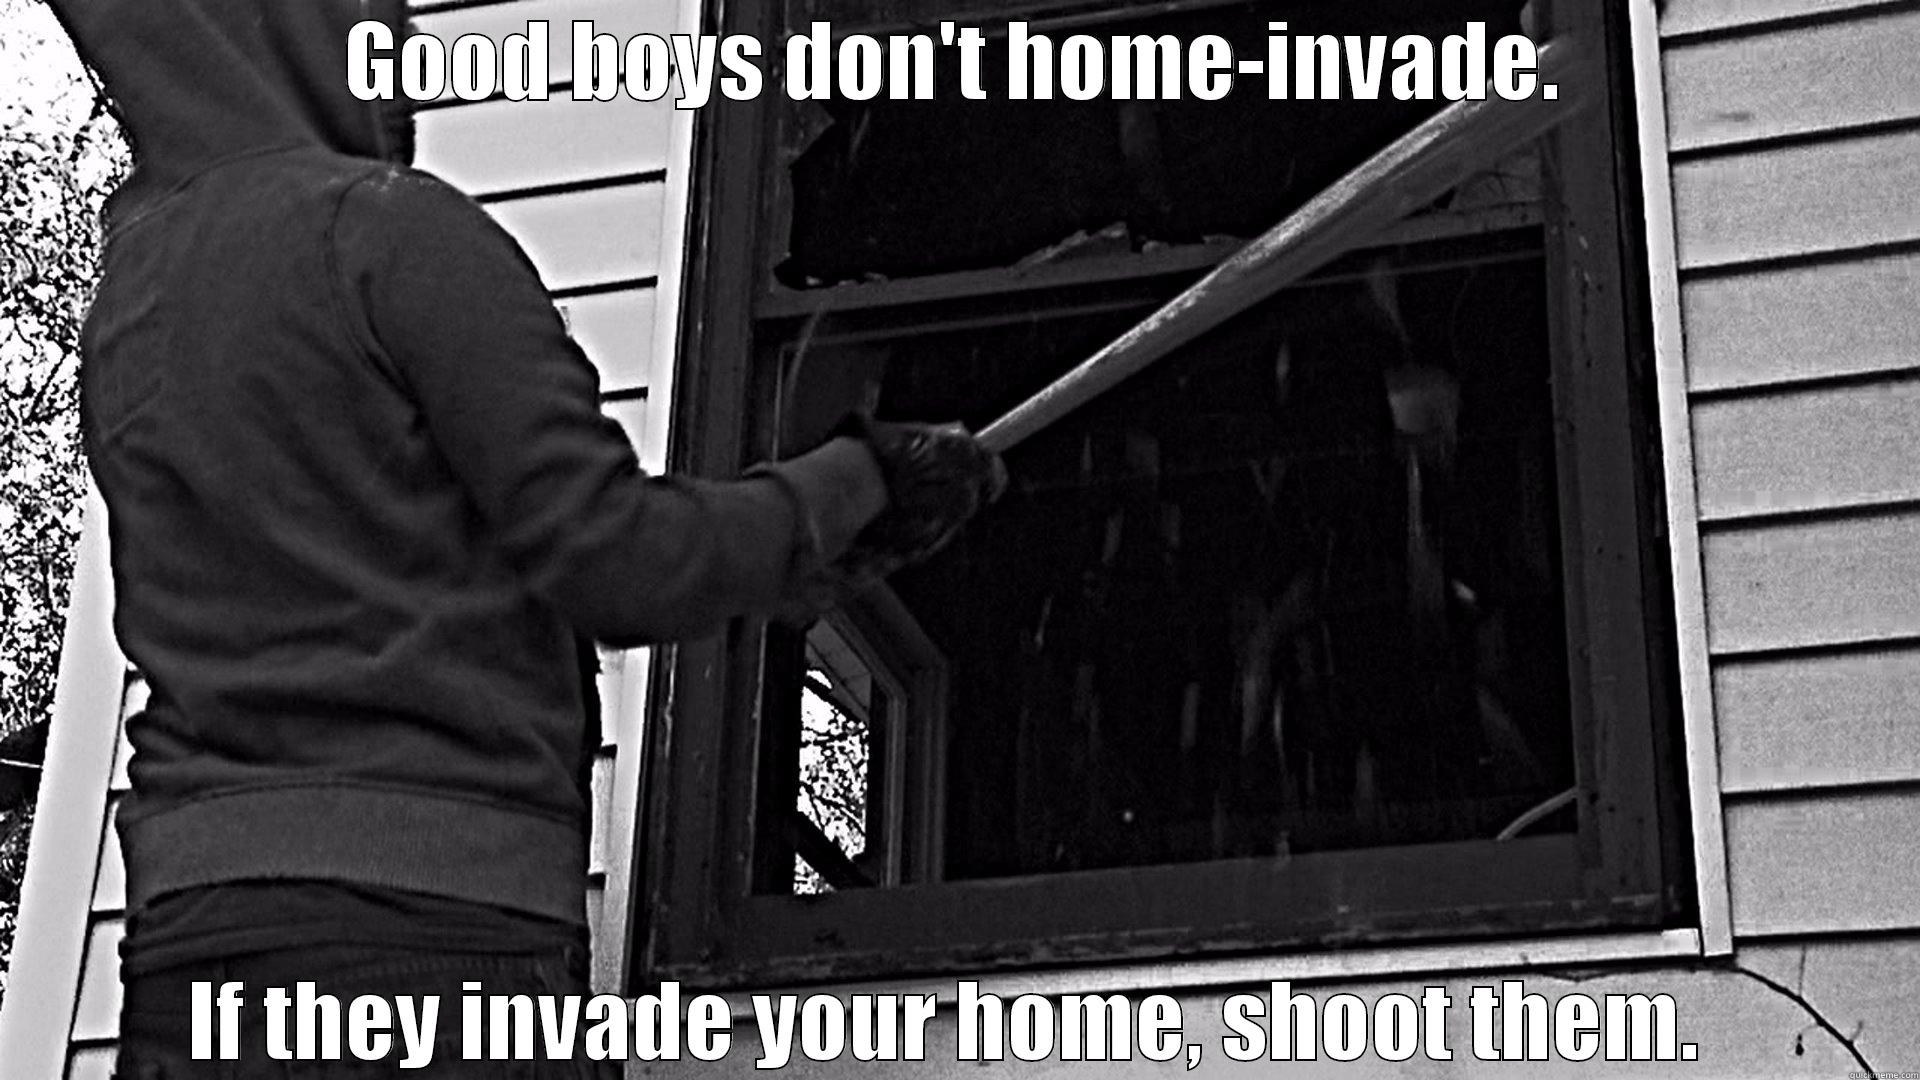 GOOD BOYS DON'T HOME-INVADE. IF THEY INVADE YOUR HOME, SHOOT THEM.  Misc